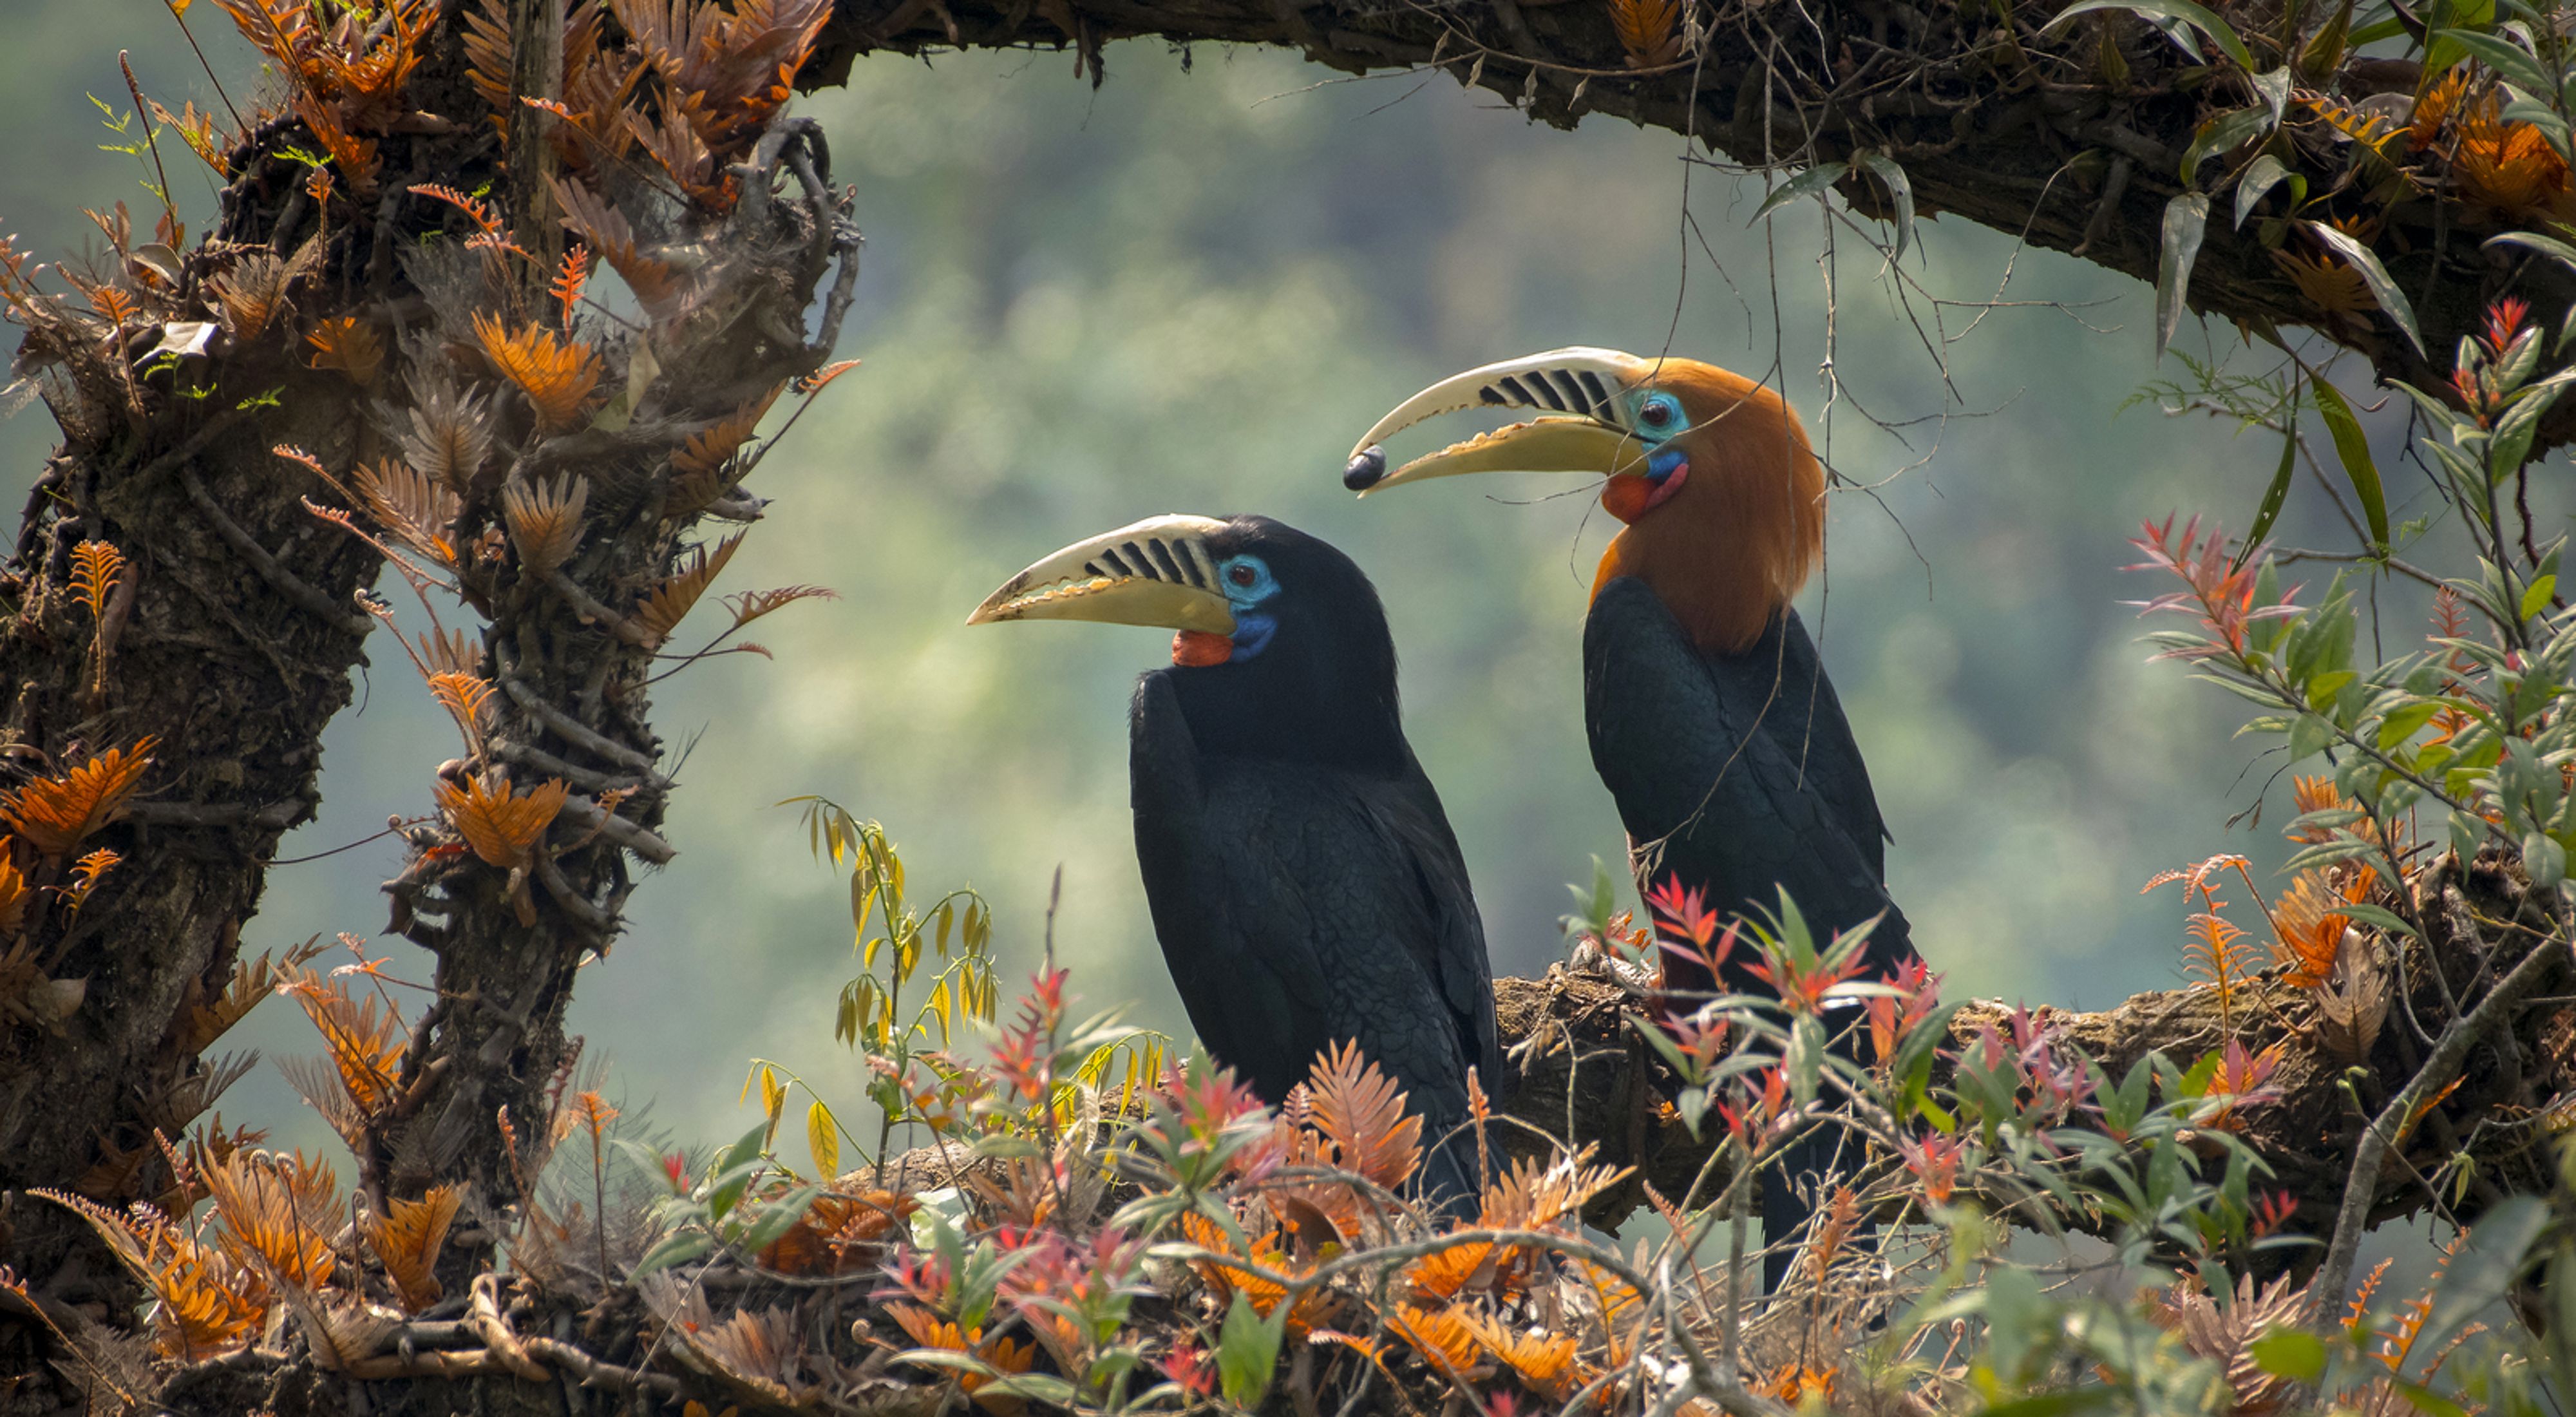 A pair of Rufous-necked Hornbills photographed near Mahananda Wildlife Sanctuary in West Bengal, India.